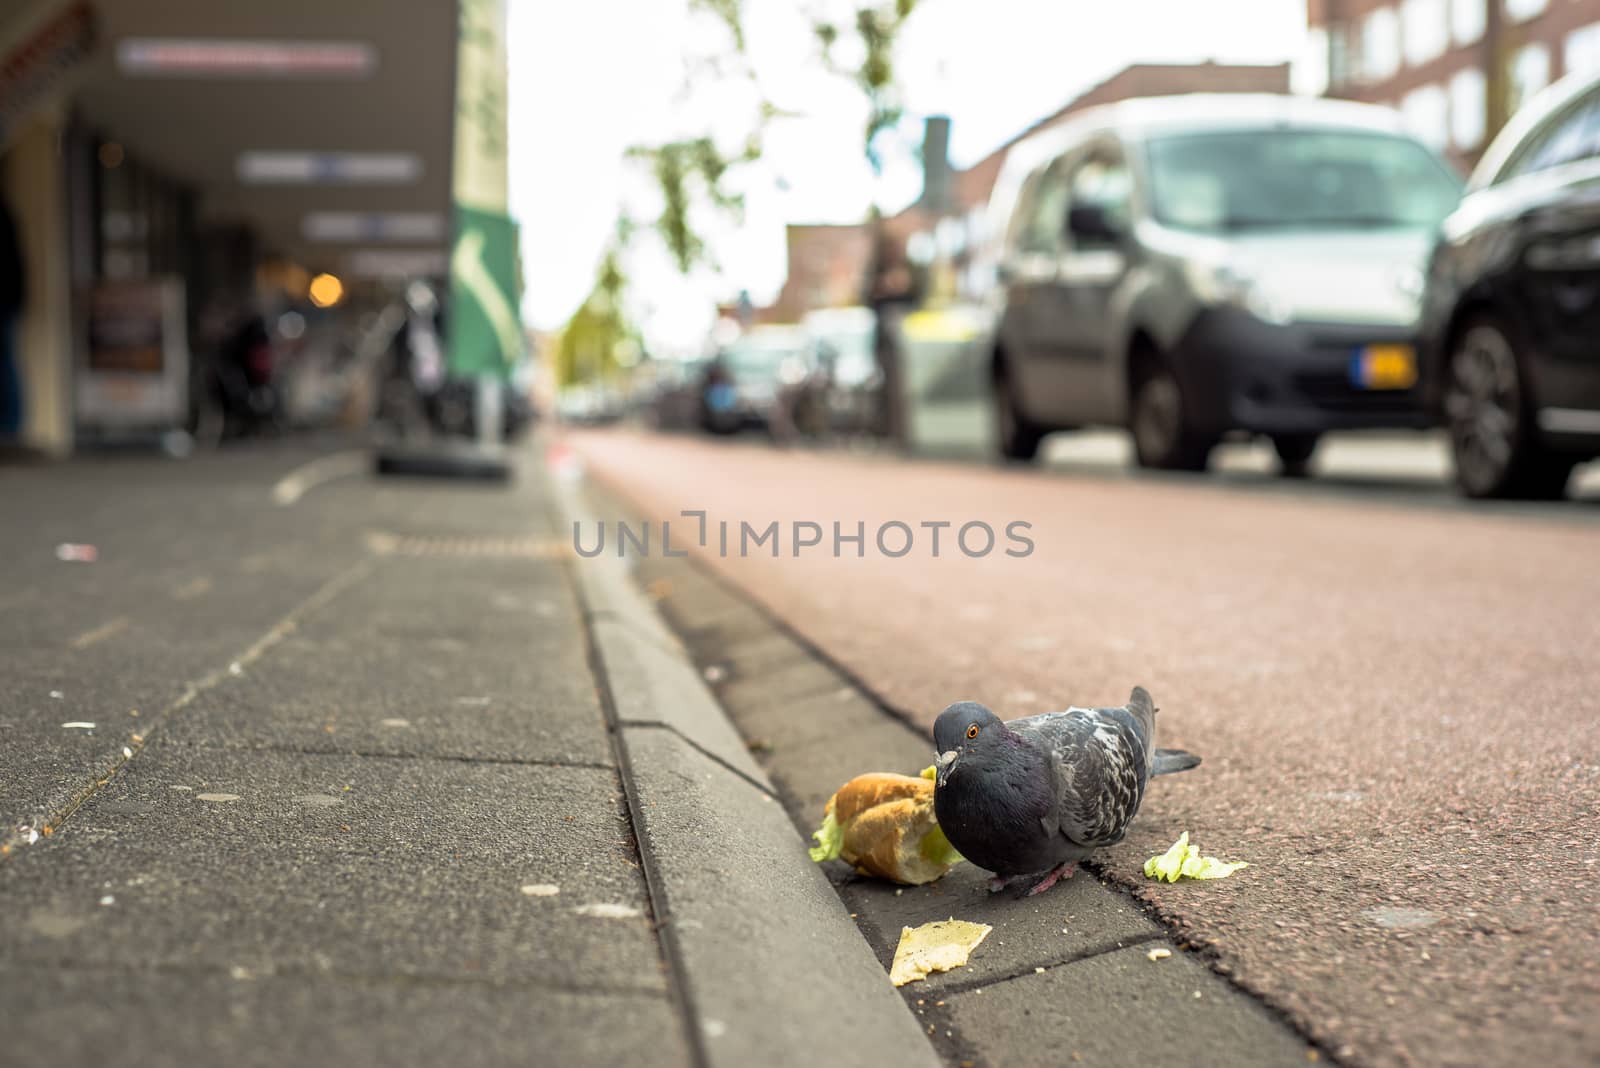 A pigeon eating a sandwich in Amsterdam, the Netherlands